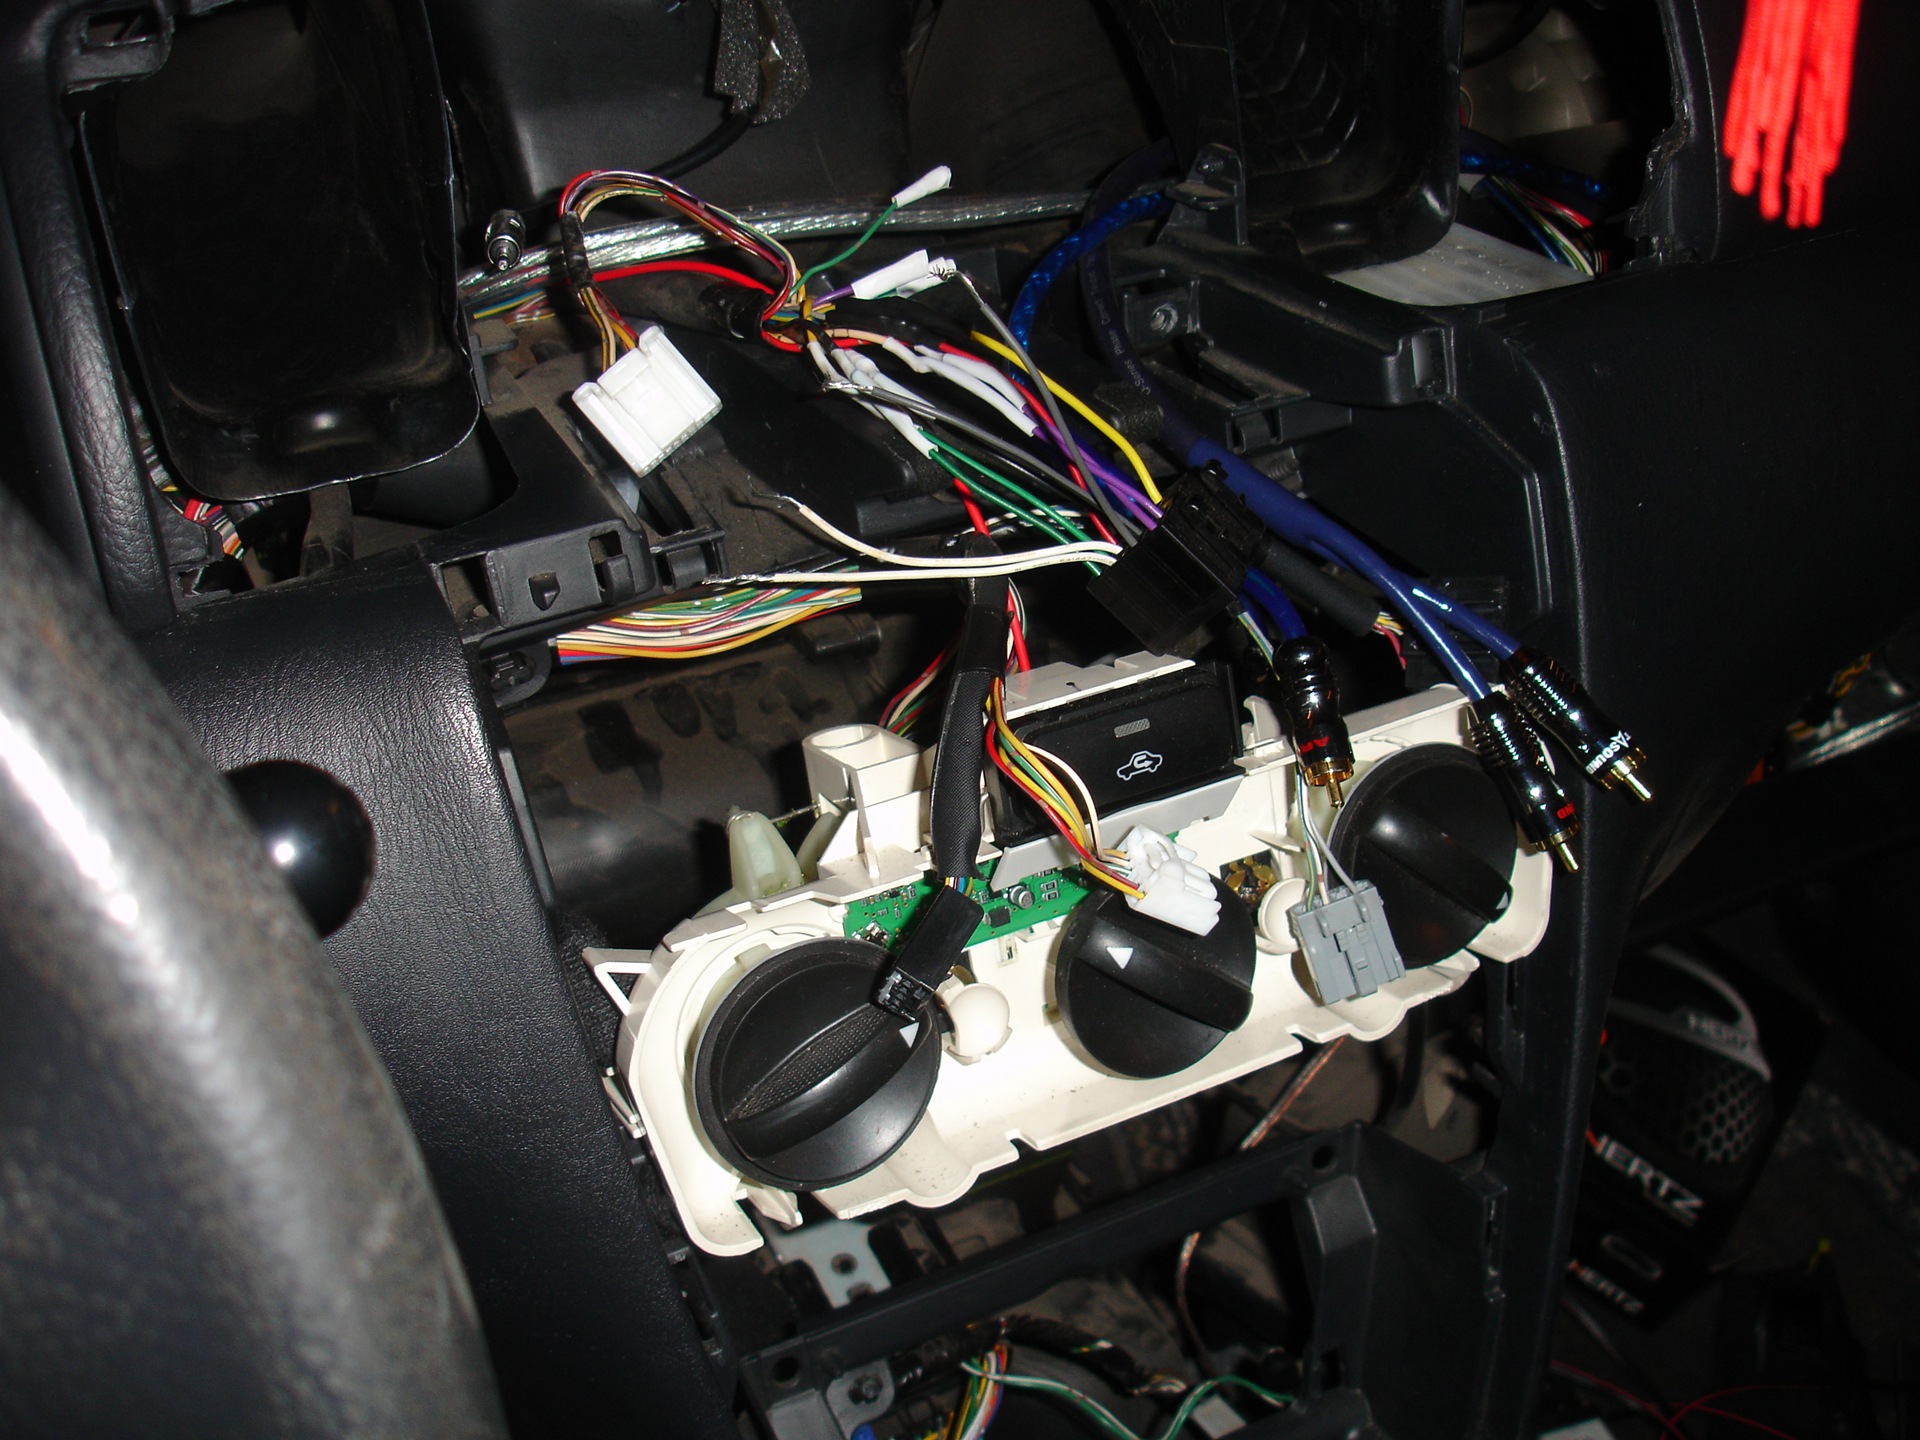 Changing the speaker system in a car - Toyota Corolla 16 liter 2005